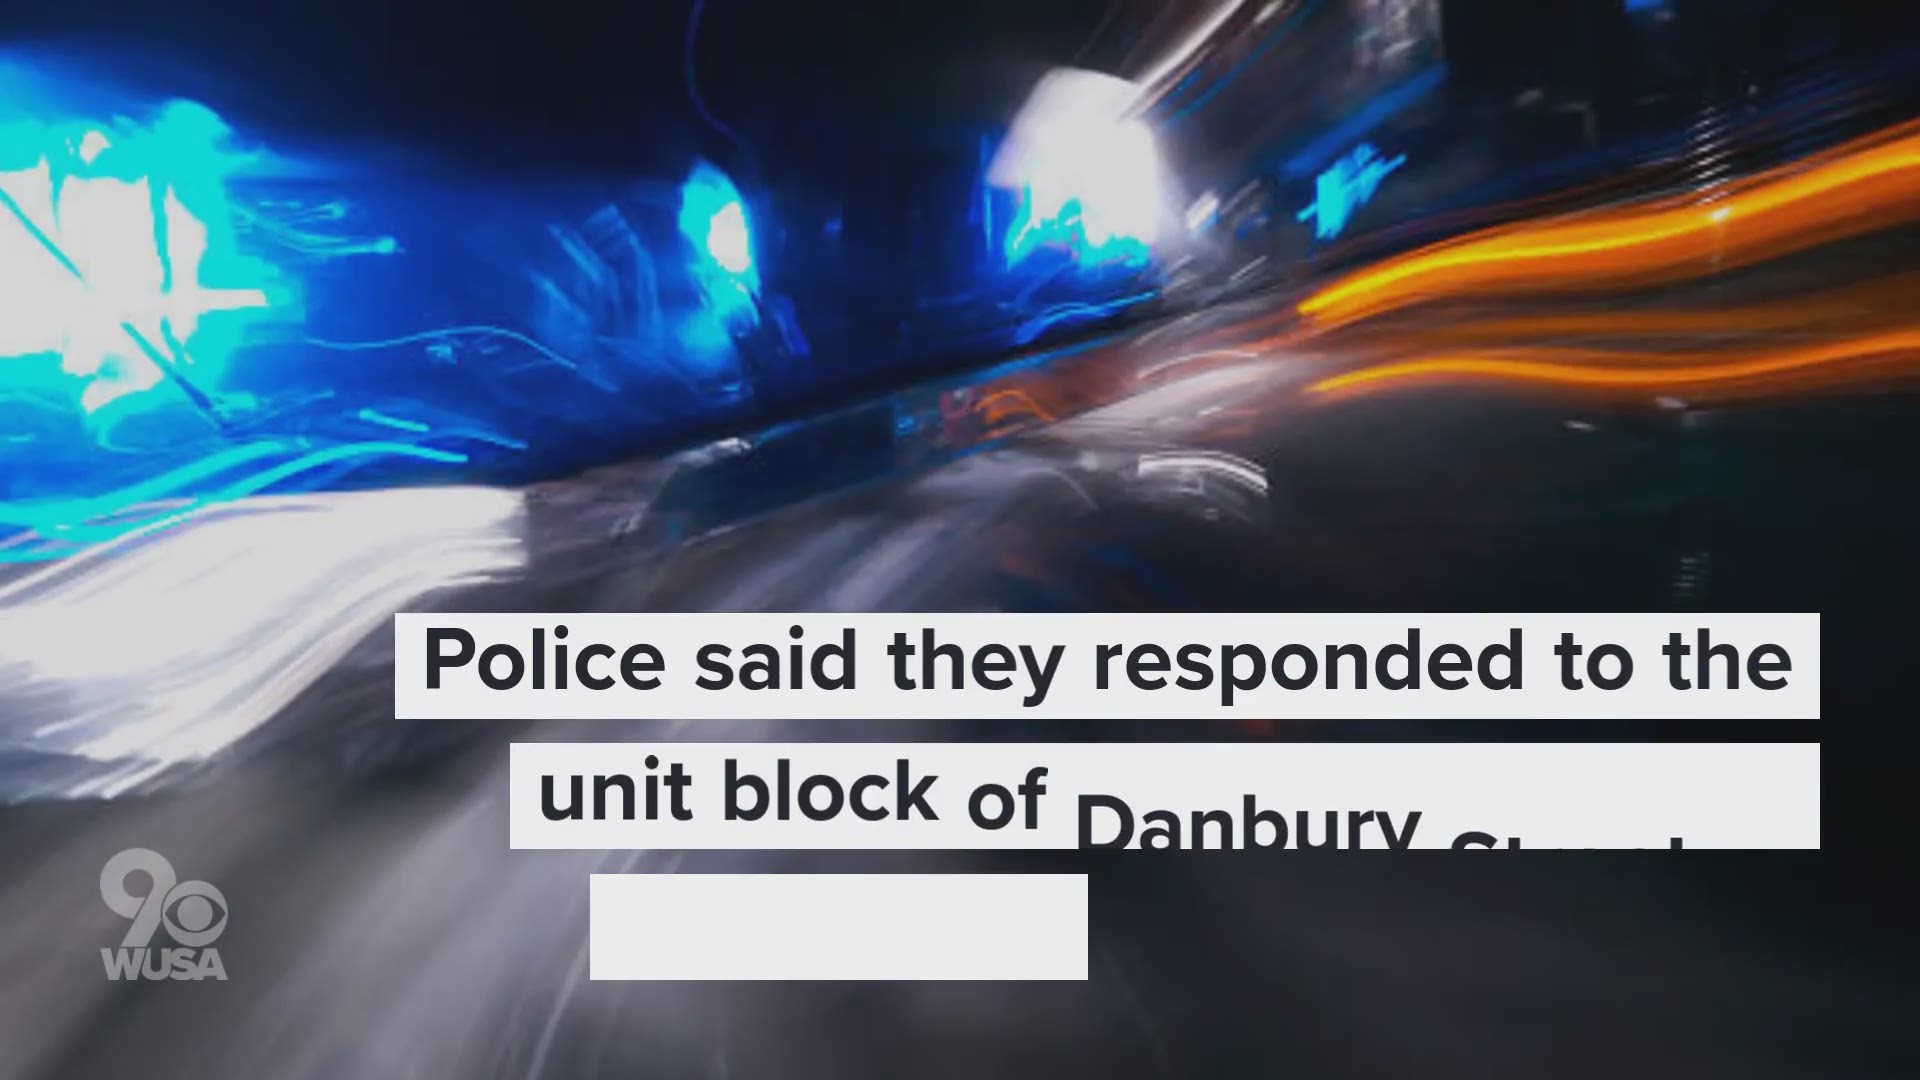 Officers responded to the unit block of Danbury Street and found a man suffering from gunshot wounds.